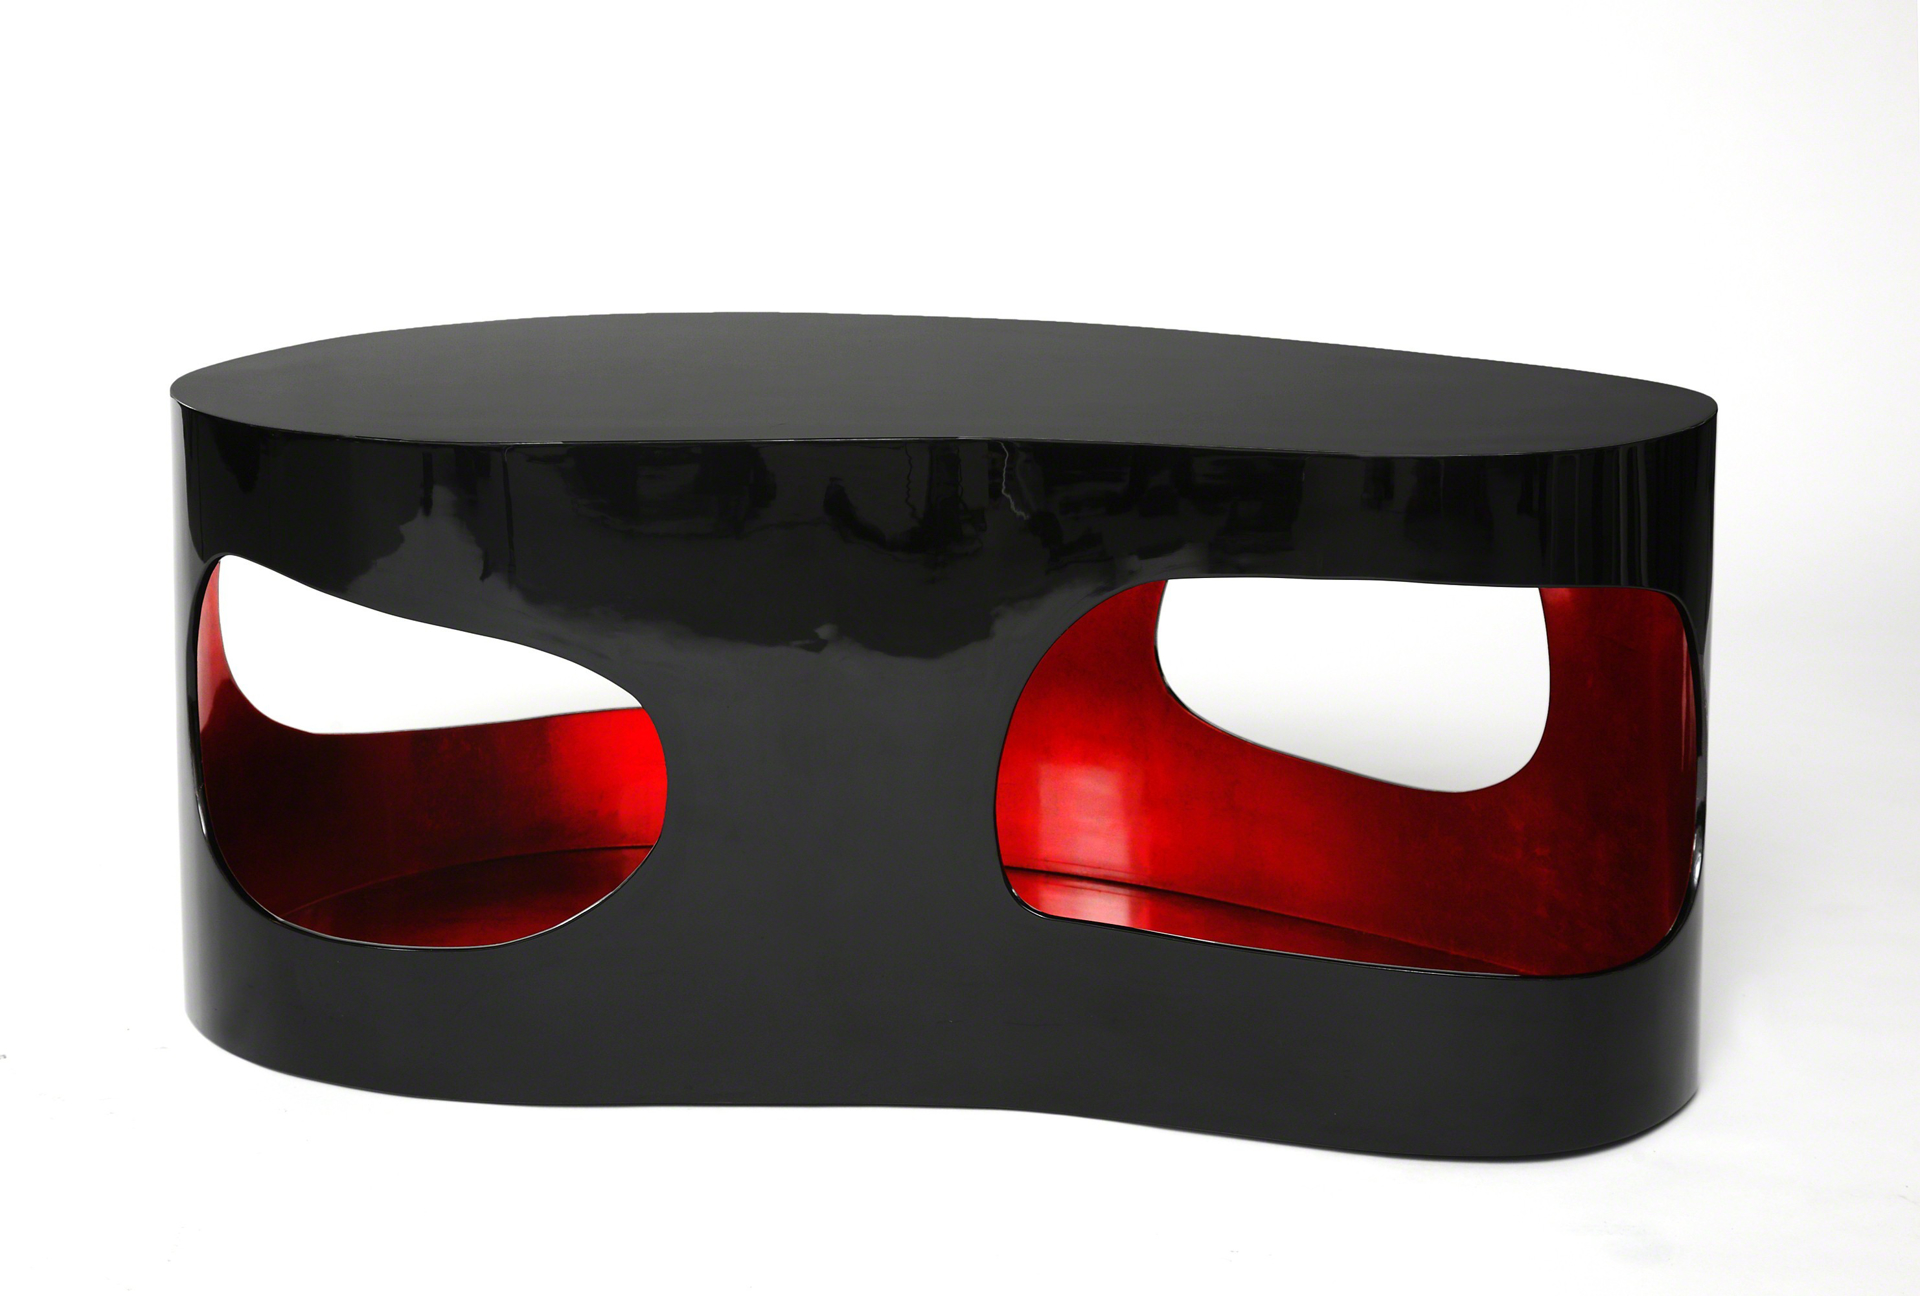 "Cloud" Coffee Table with Red by Jacques Jarrige